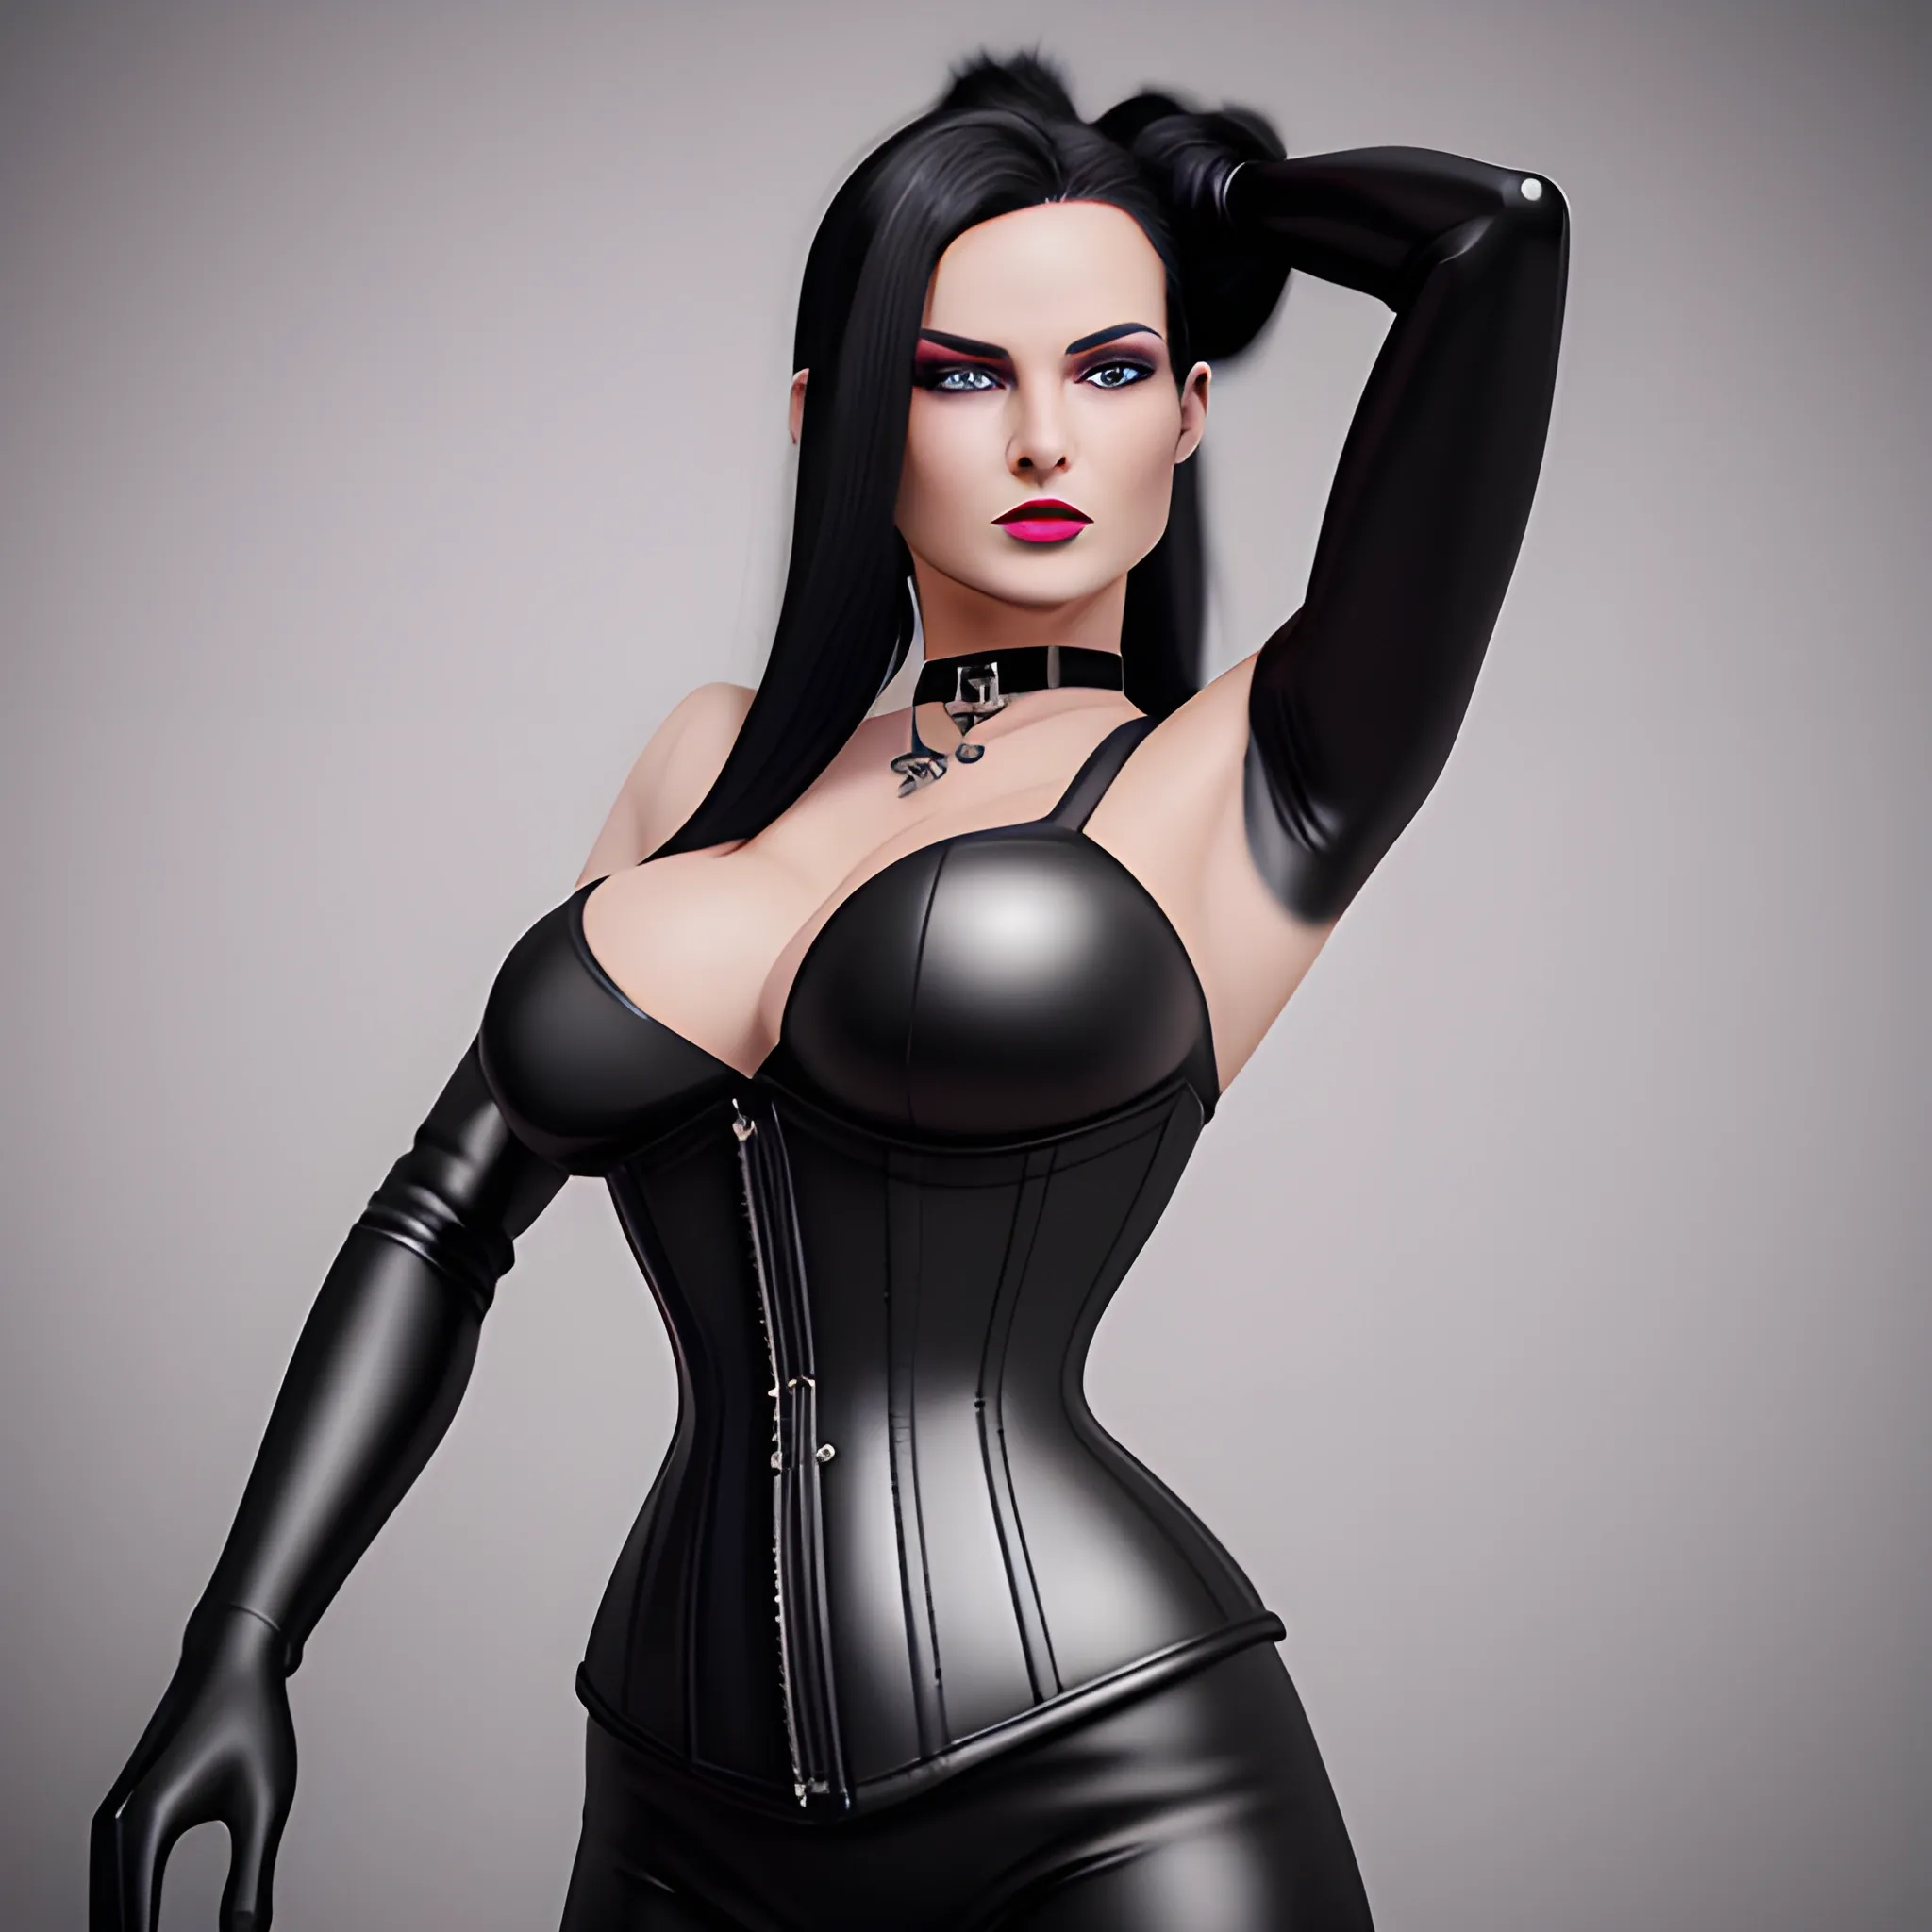 Beautiful Black shoulder length haired business woman with black lipstick and eye makeup dressed in a black leather silver front buckle corset a black leather full body catsuit a black leather silver O ring choker and black leather calf high boots posing standing facing the camera full body shot hair tied into ponytail in the center of the back of her head photo realistic 24k ultra realistic quality 3D no deformation five fingers on each hand
Delete
Beautiful Black shoulder length haired business woman with black lipstick and eye makeup dressed in a black leather silver front buckle corset a black leather full body catsuit a black leather silver O ring choker and black leather calf high boots posing standing facing the camera full body shot hair tied into ponytail in the center of the back of her head photo realistic 24k ultra realistic quality 3D no deformation five fingers on each hand 